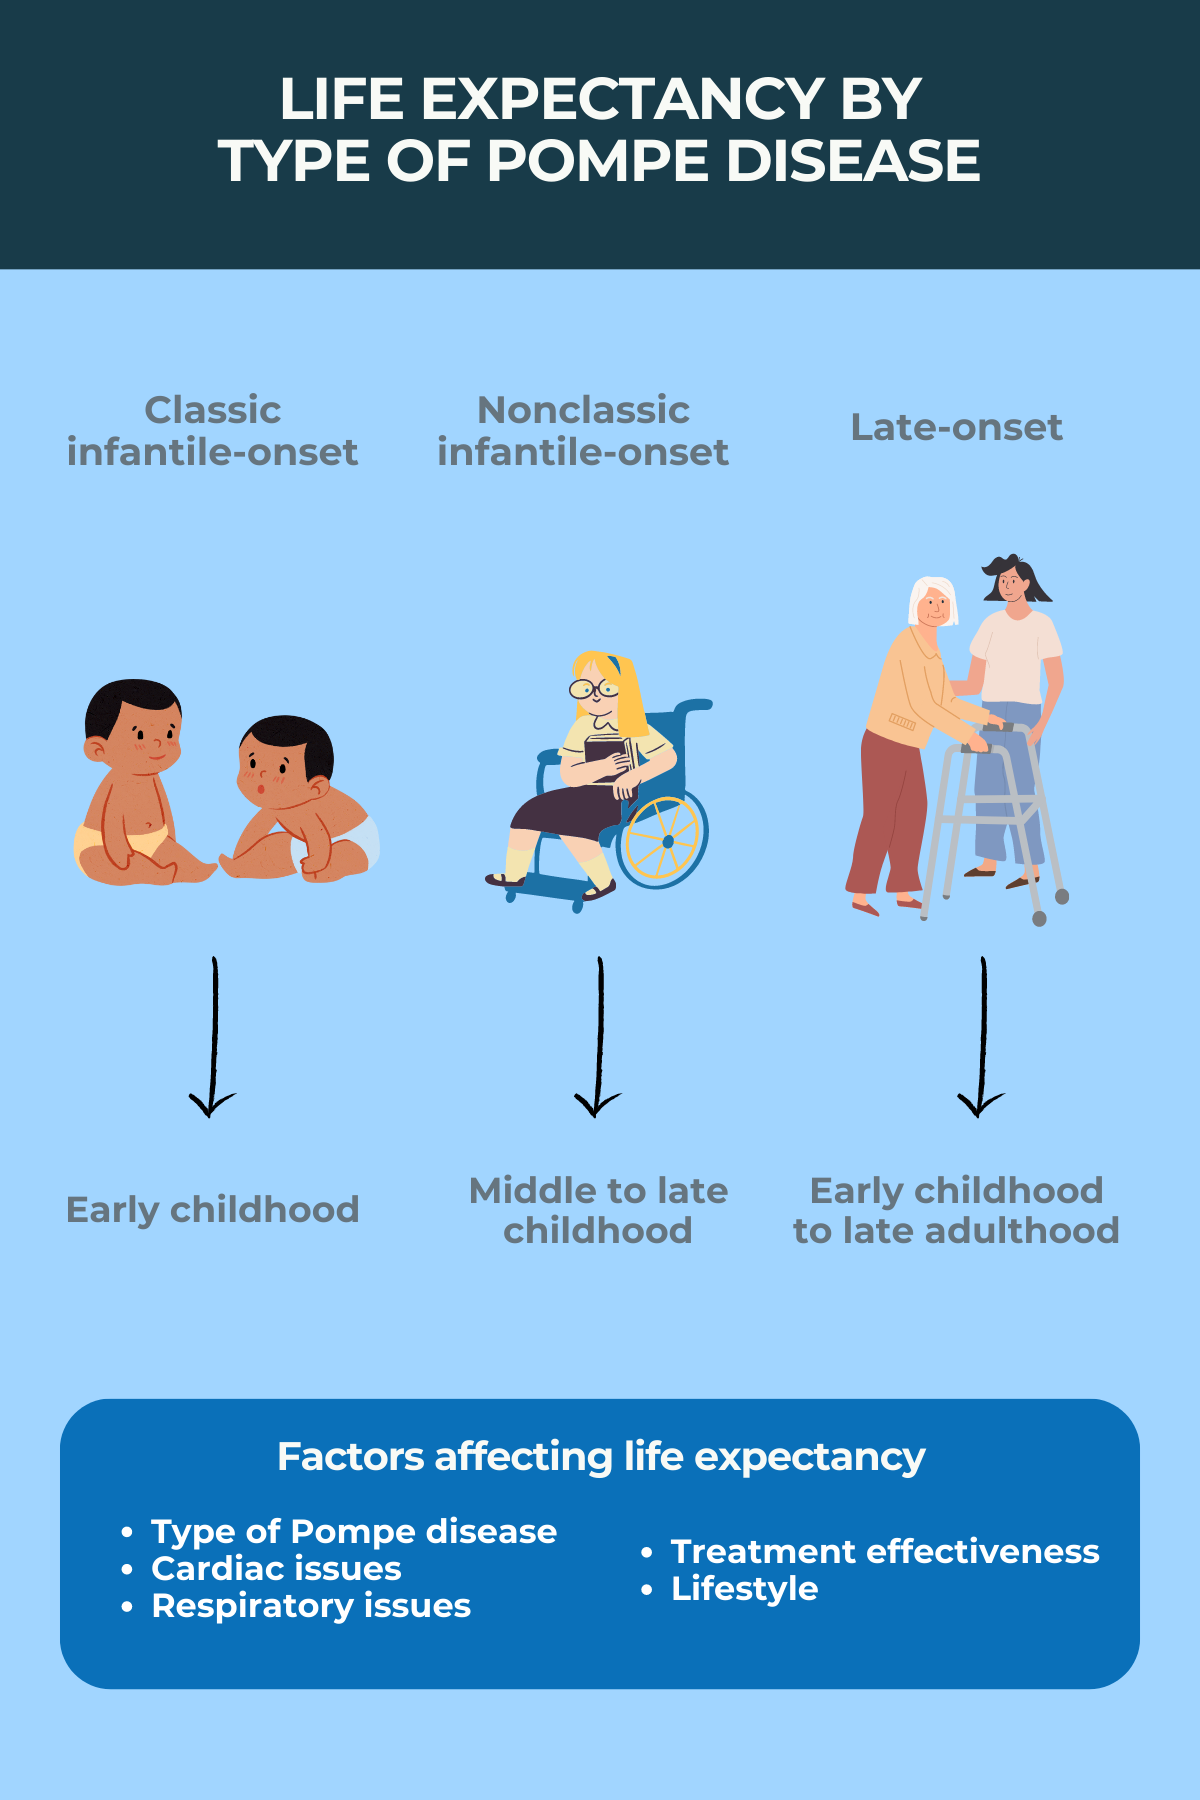 Infographic depicting factors affecting life expectancy in Pompe